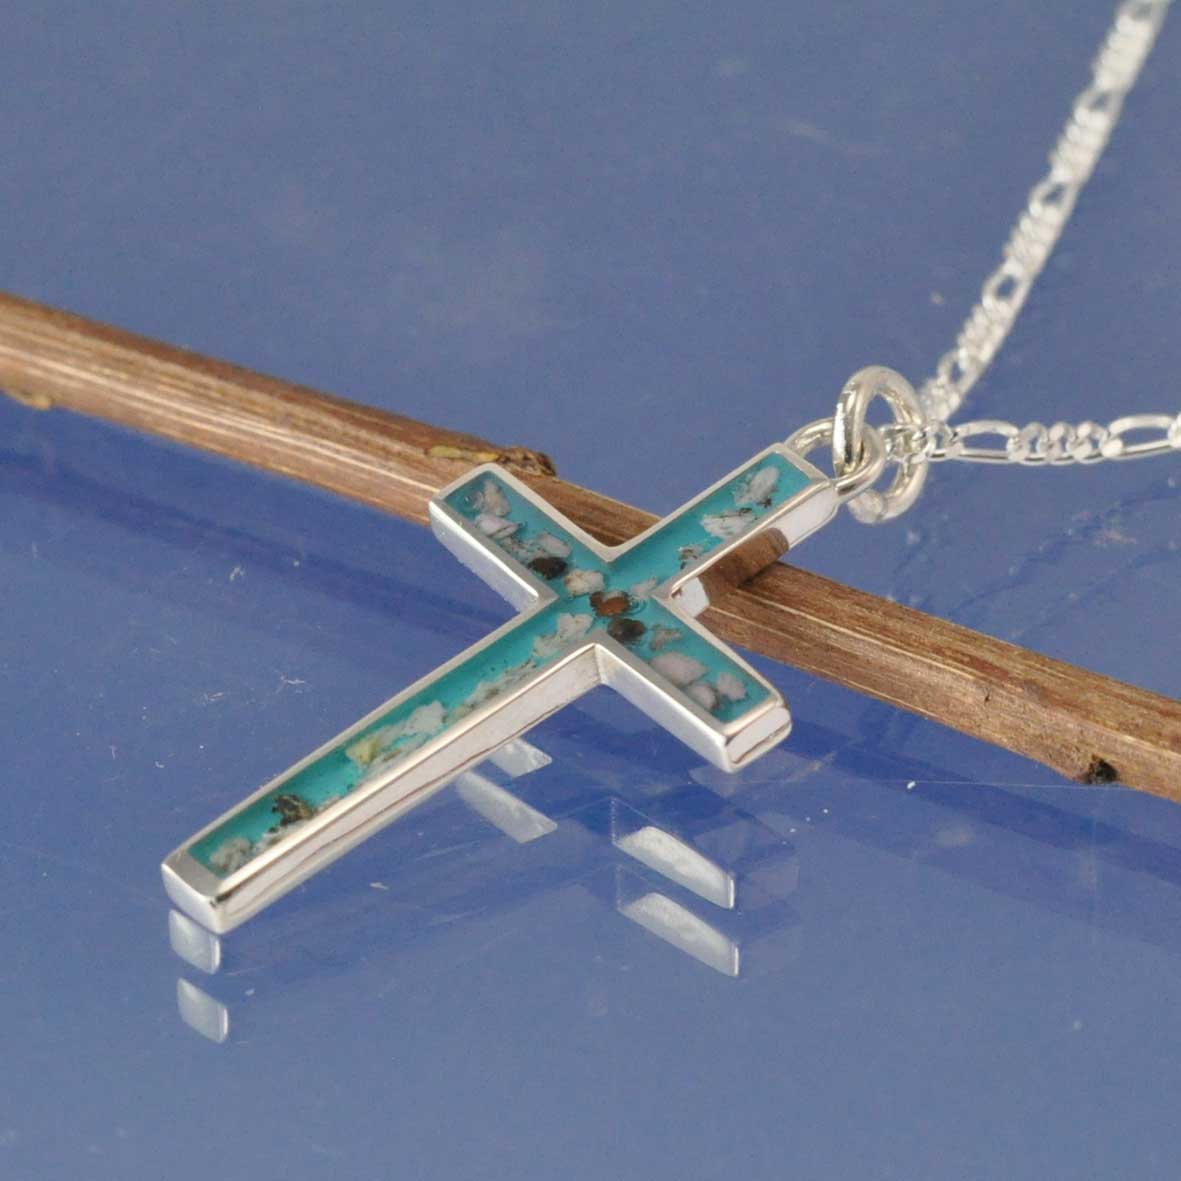 Cremation Ashes Necklace Cross Pendant by Chris Parry Jewellery